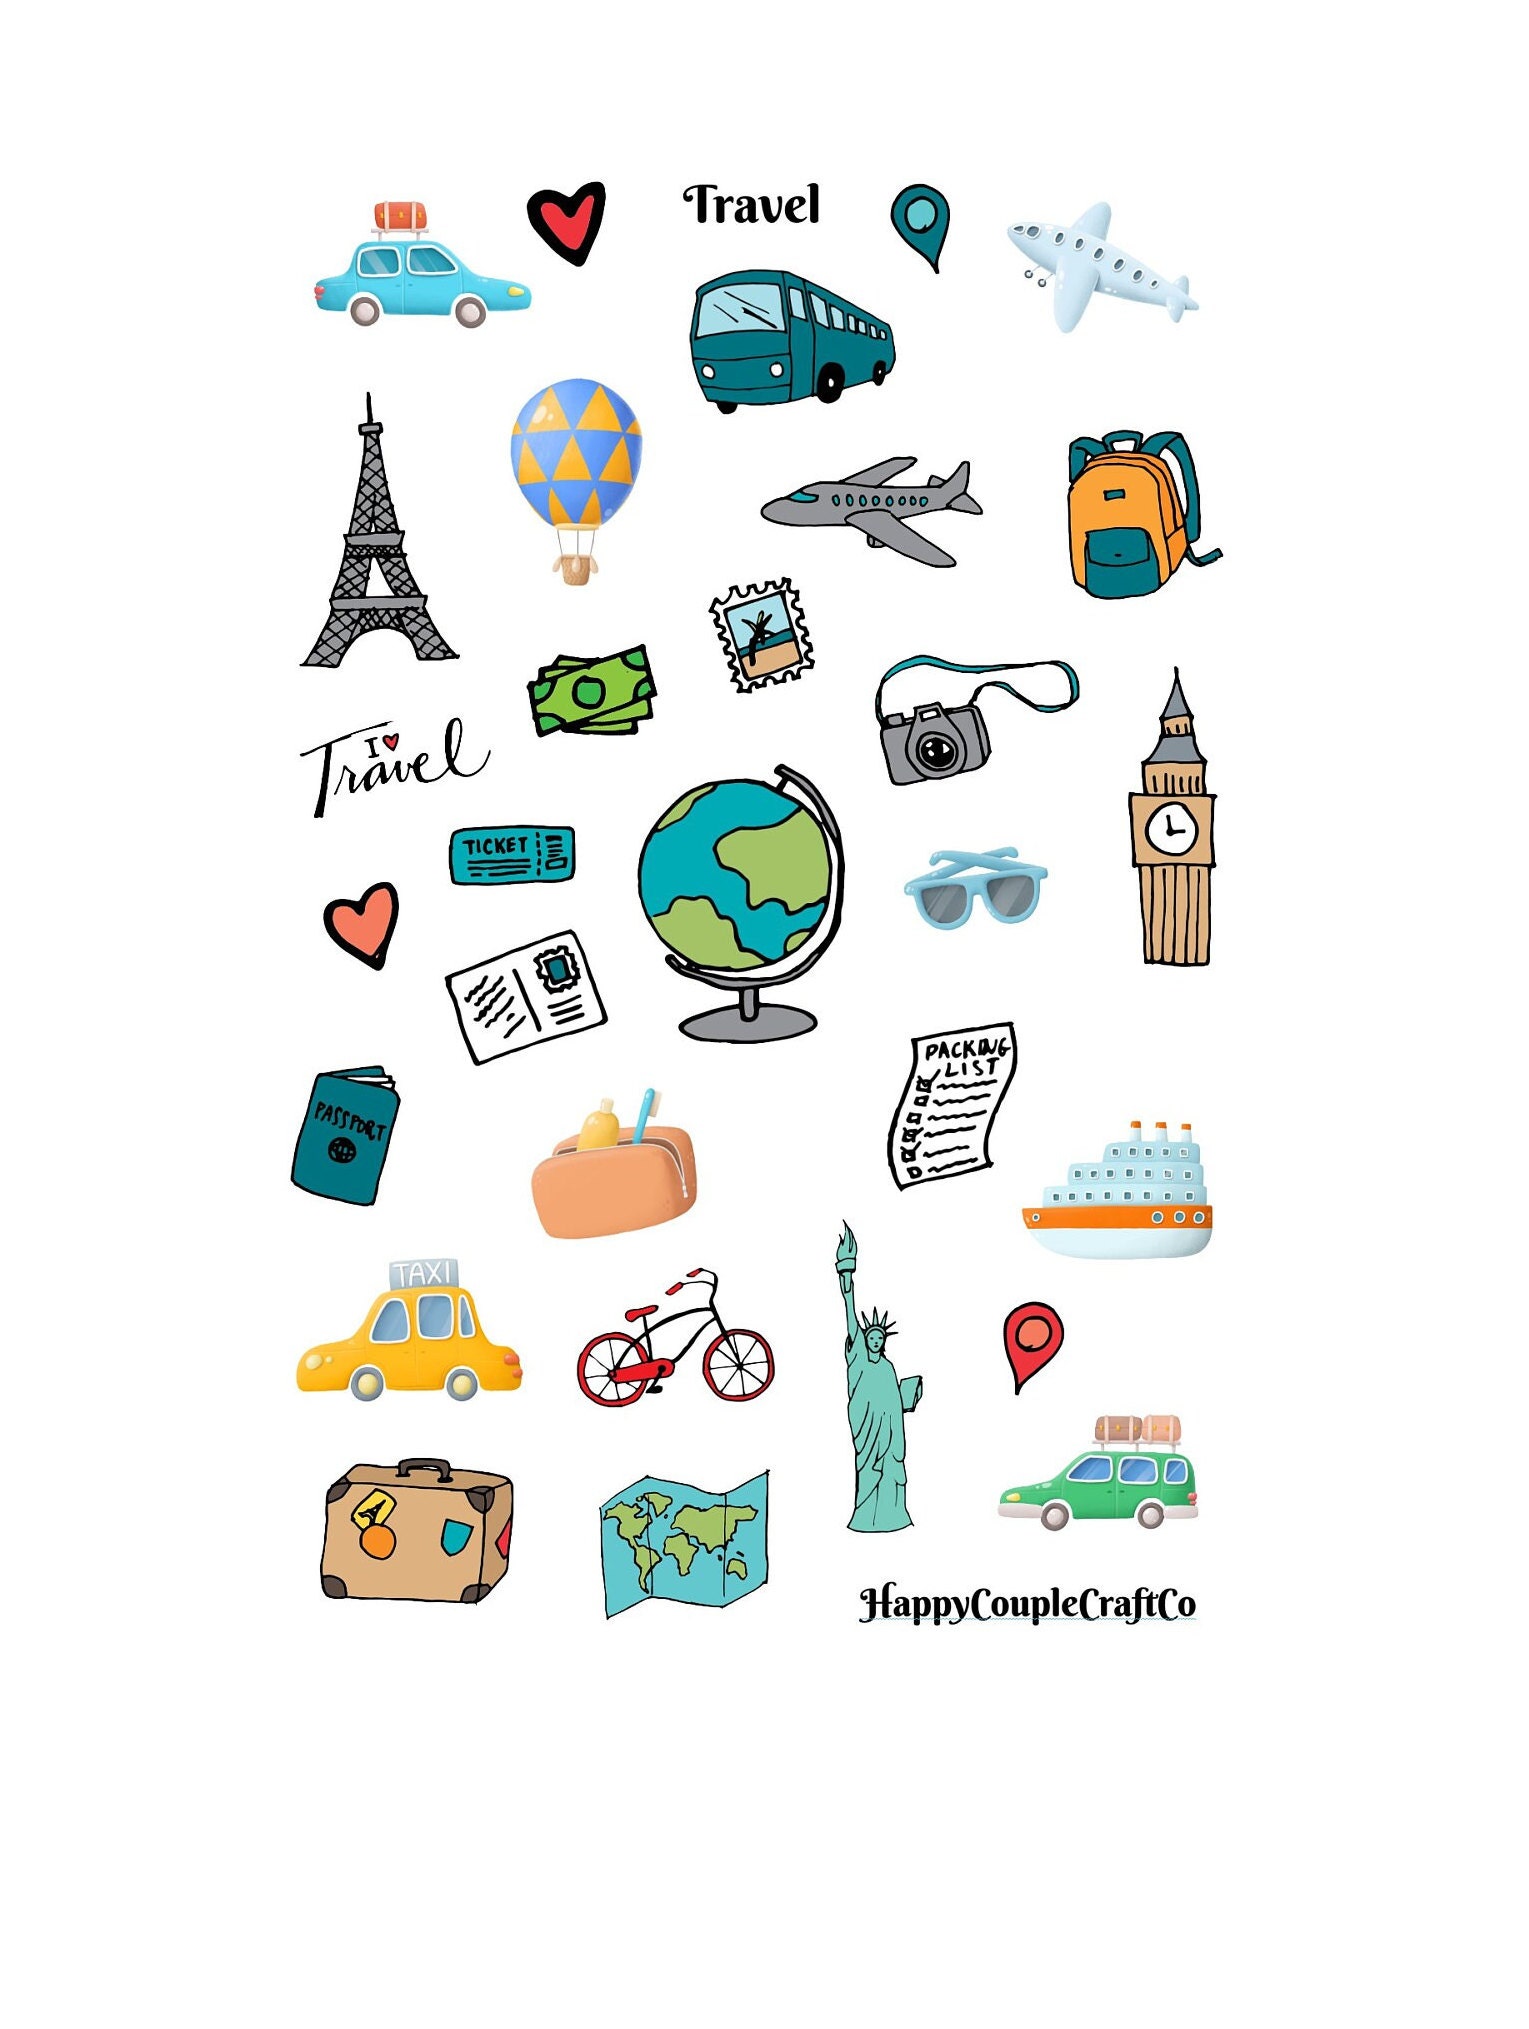 Vacation Road Trip Tourism Stickers Party Supplies Pack - 100+ Travel  Summertime Fun Stickers for Kids Adults (Travel Party Favors, Scrapbooking